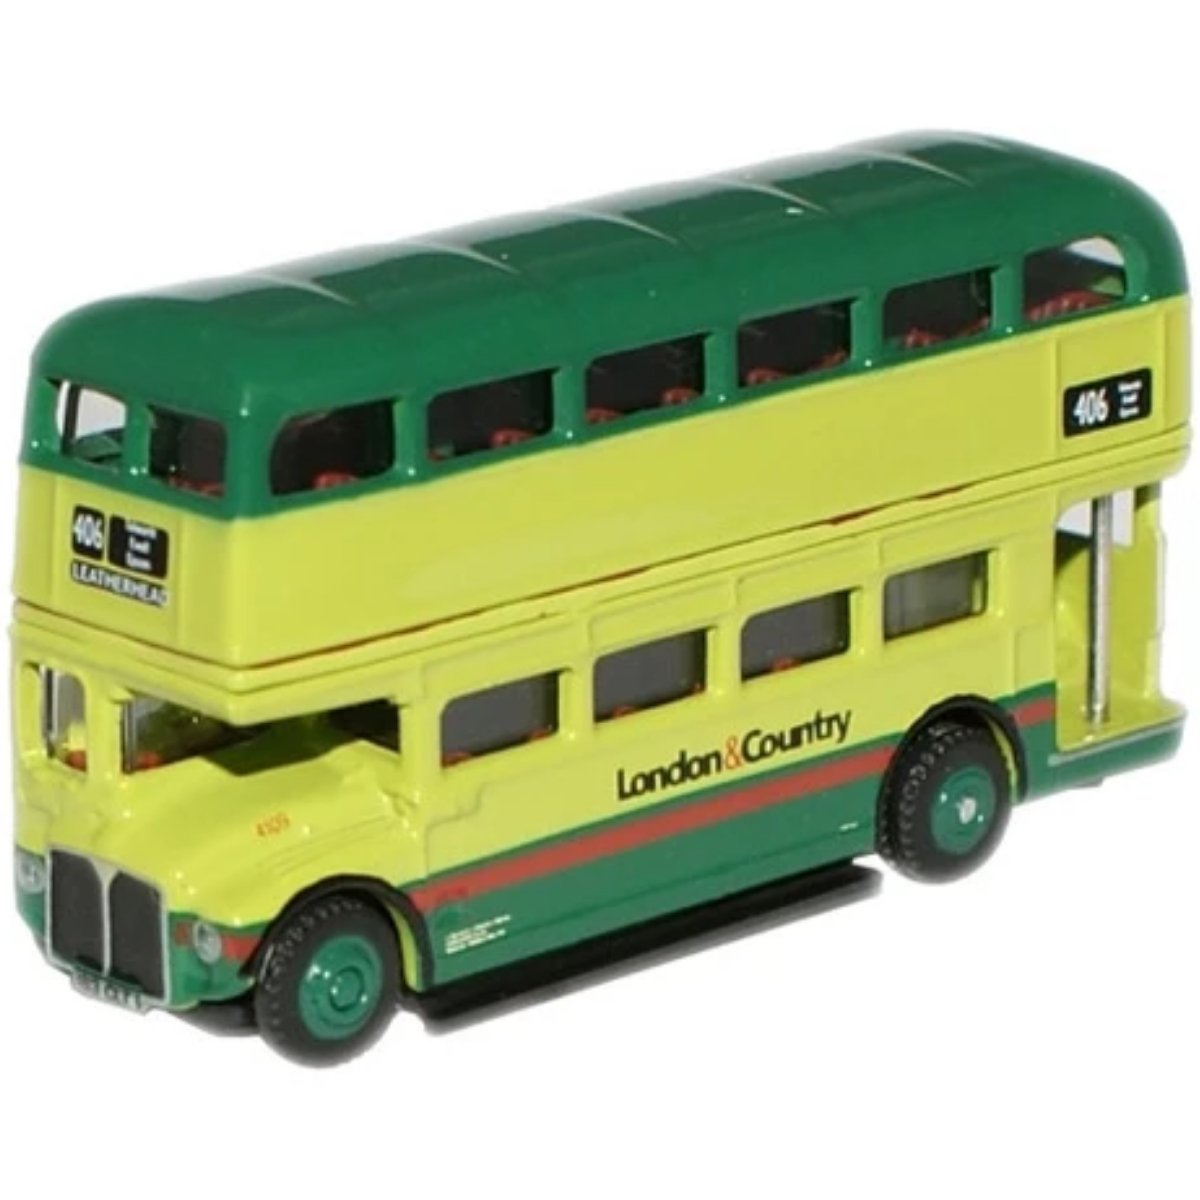 Oxford Diecast NRM009 London & Country Routemaster - Phillips Hobbies